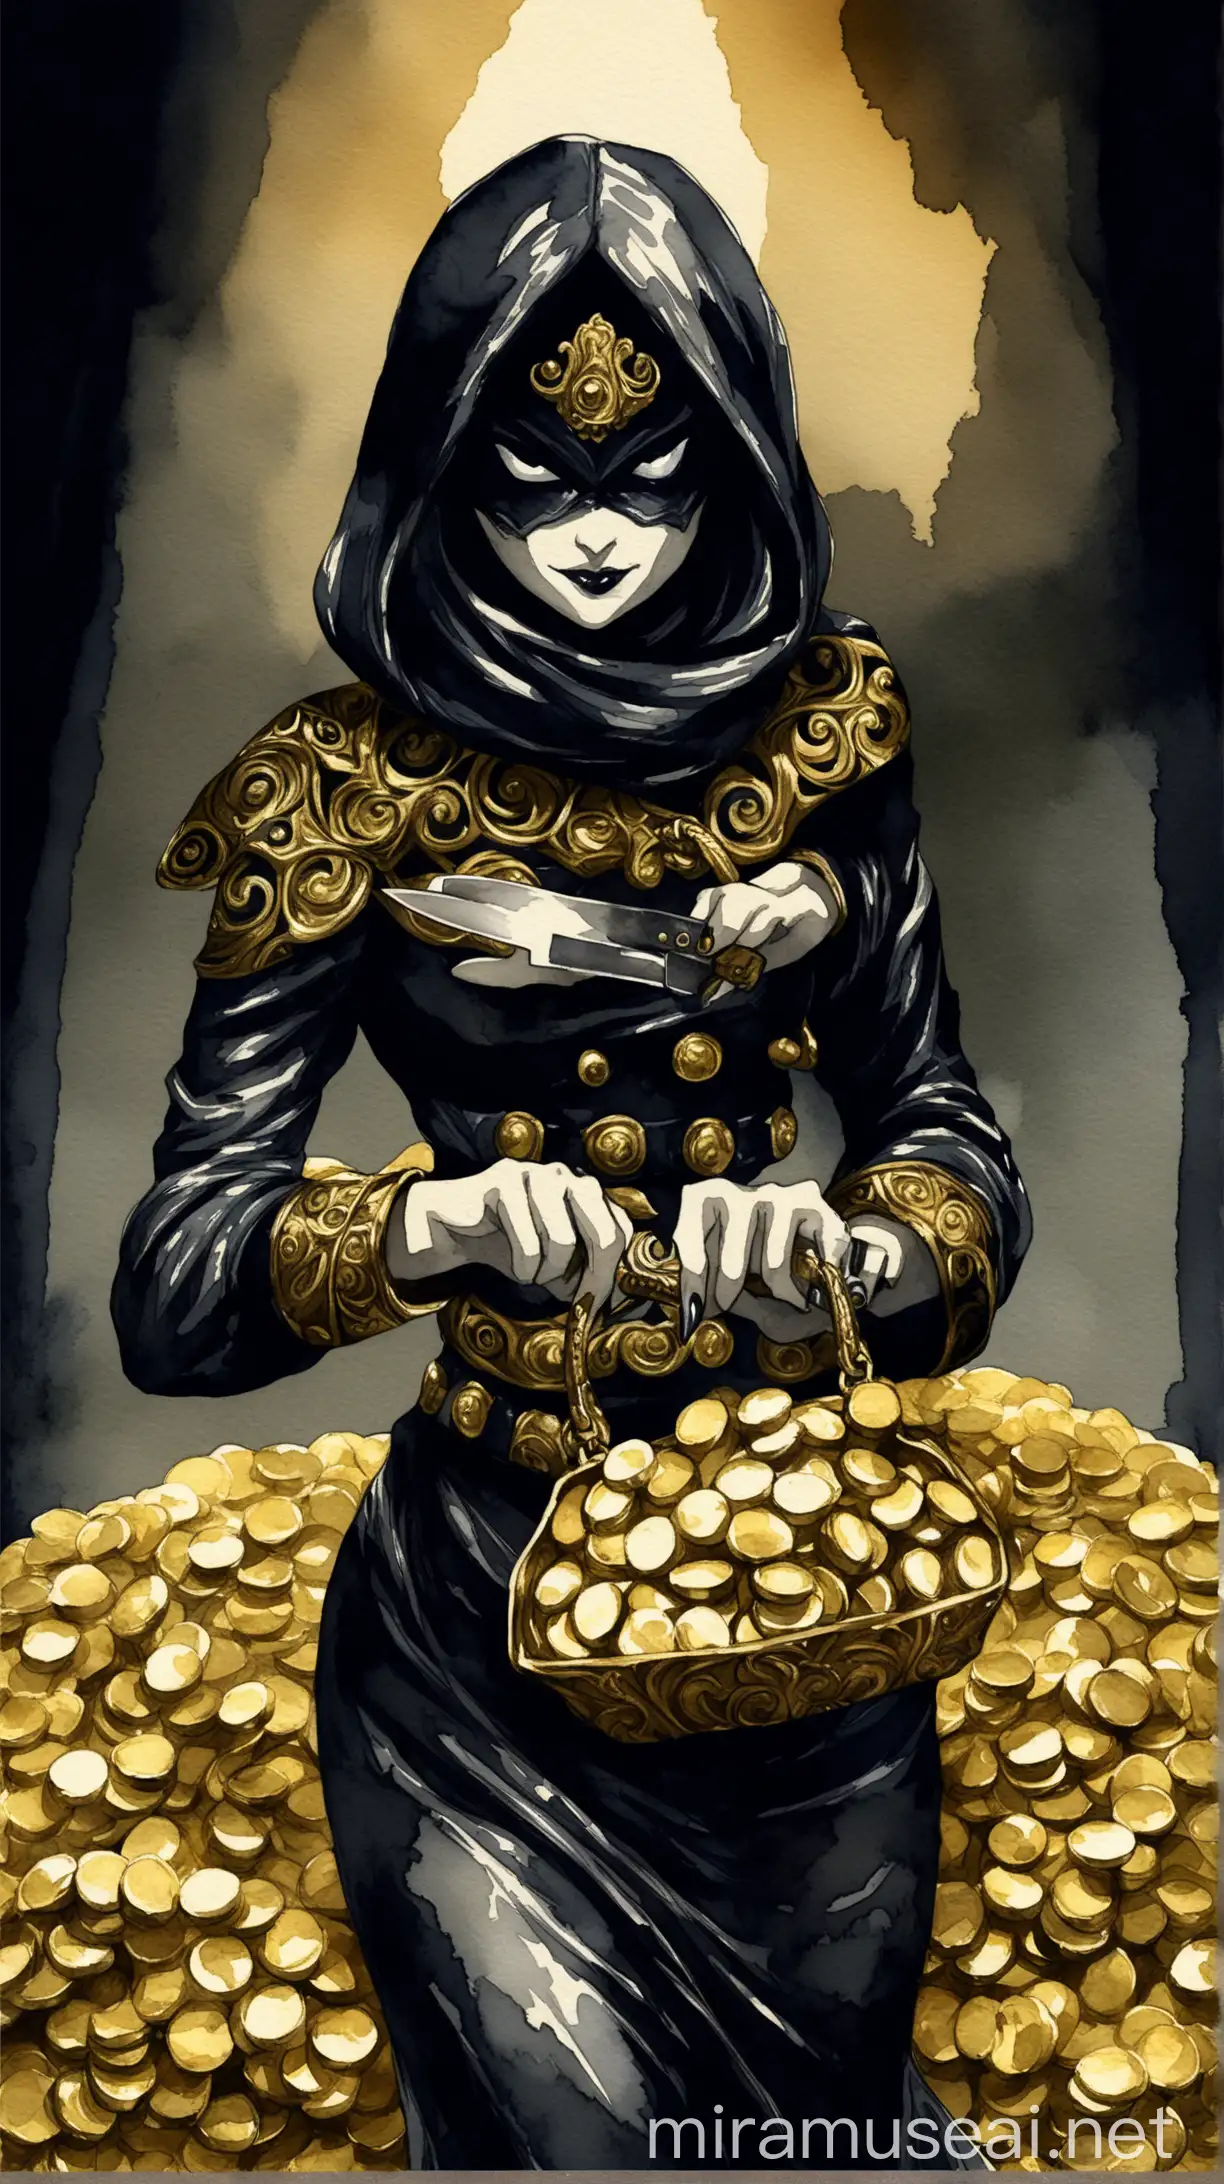 Subject: The central focus of the image is a beautiful and elegant evil woman thief with a bag of gold and with a knife.
Background: dark background painted in watercolor
Style/Coloring: Colors adds depth and richness to the scene. Textures and shadows make the picture more detailed. JoJo reference.